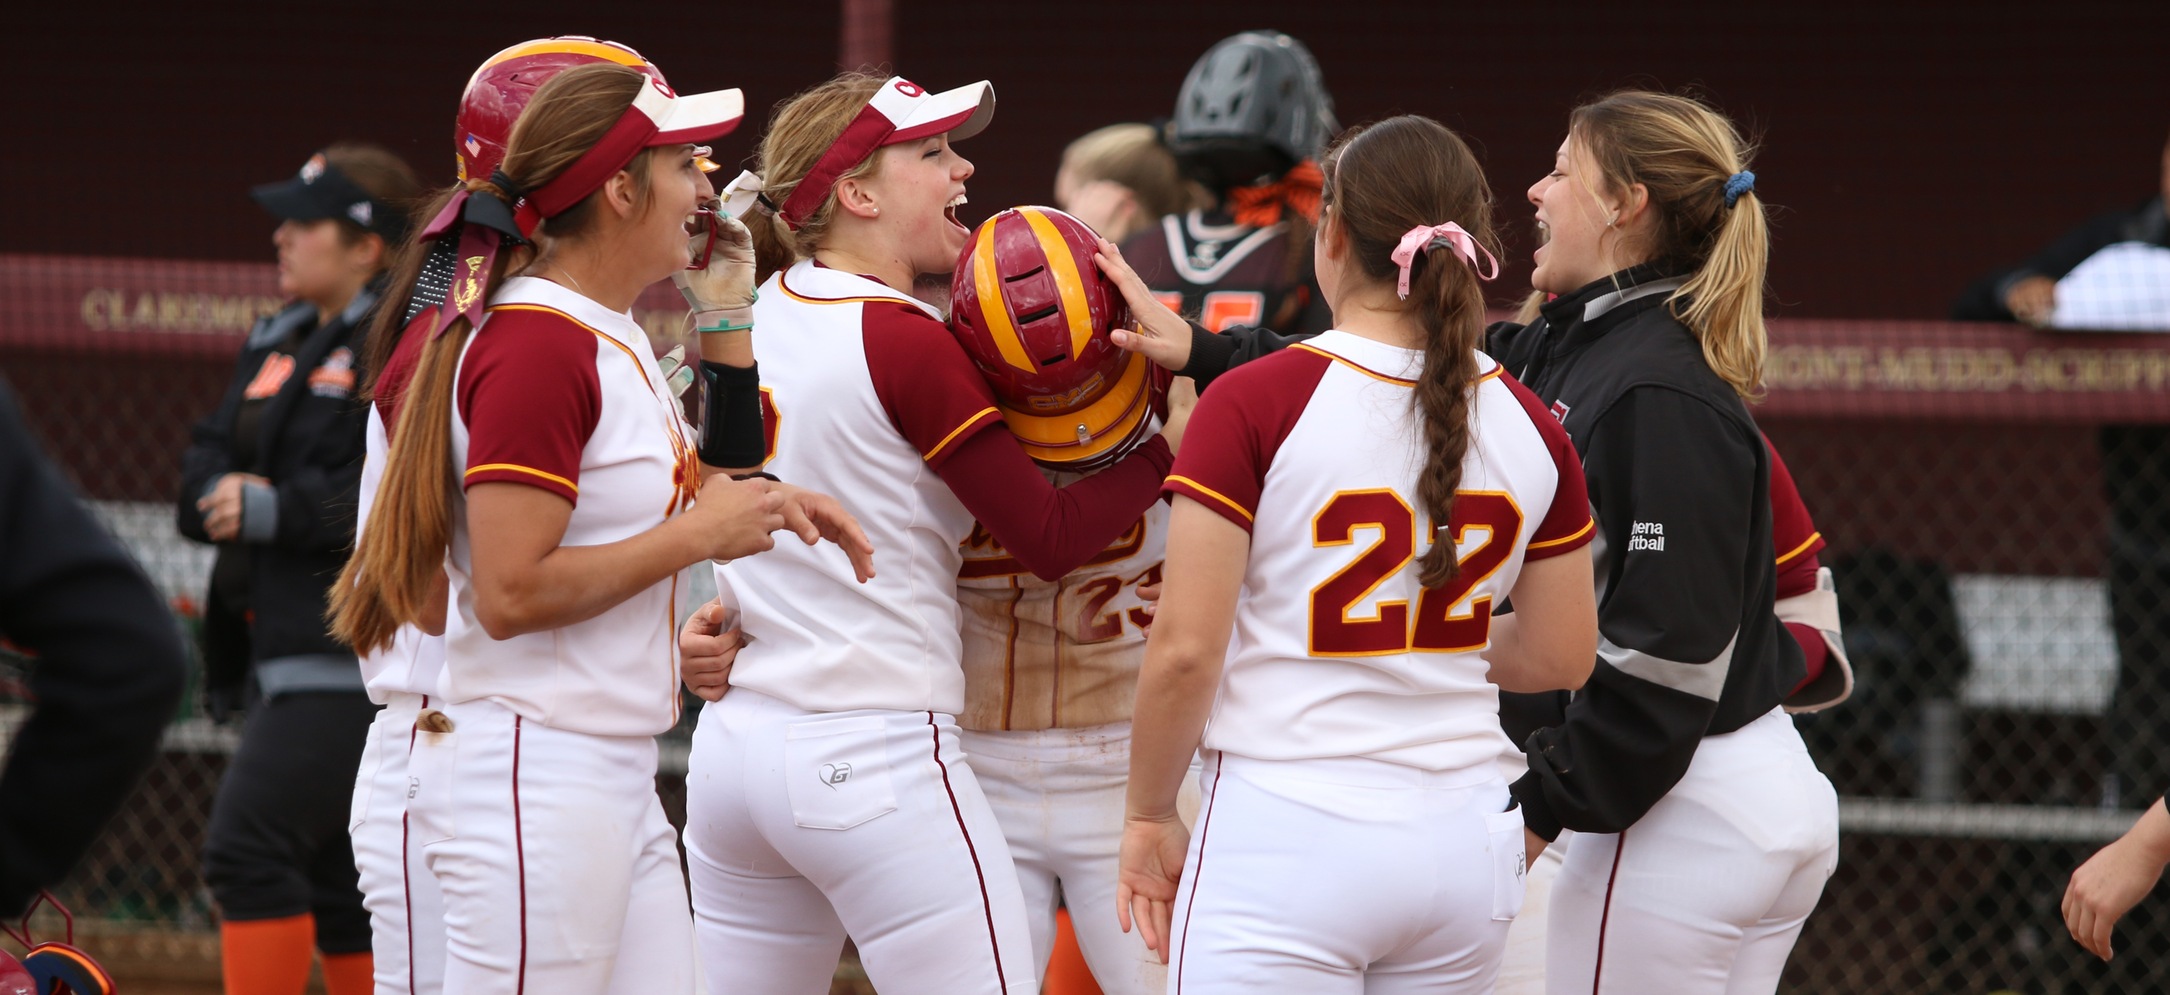 Two Games, Two Walk-Off Wins for the Athenas